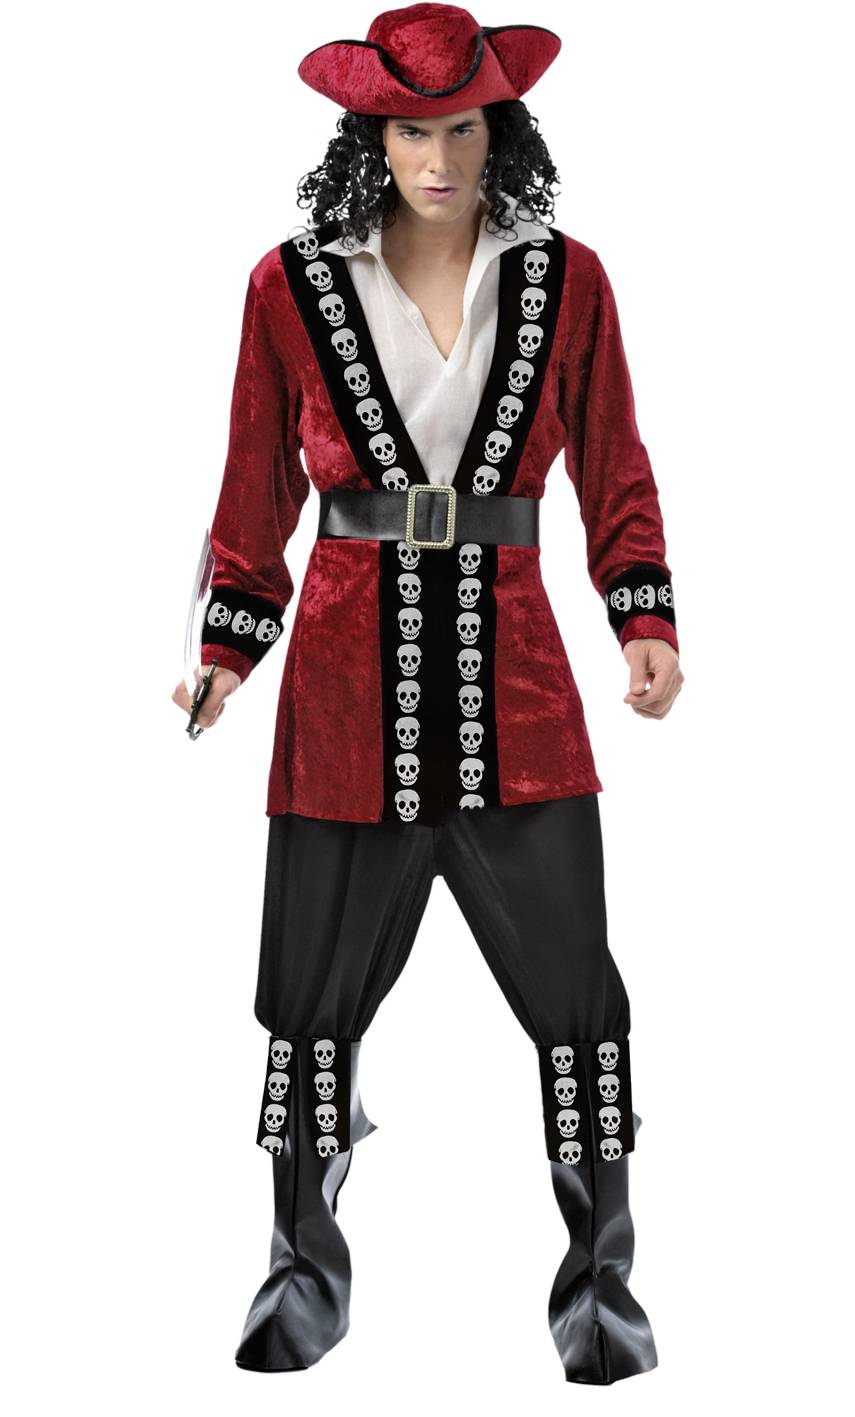 Costume pirate homme pas cher